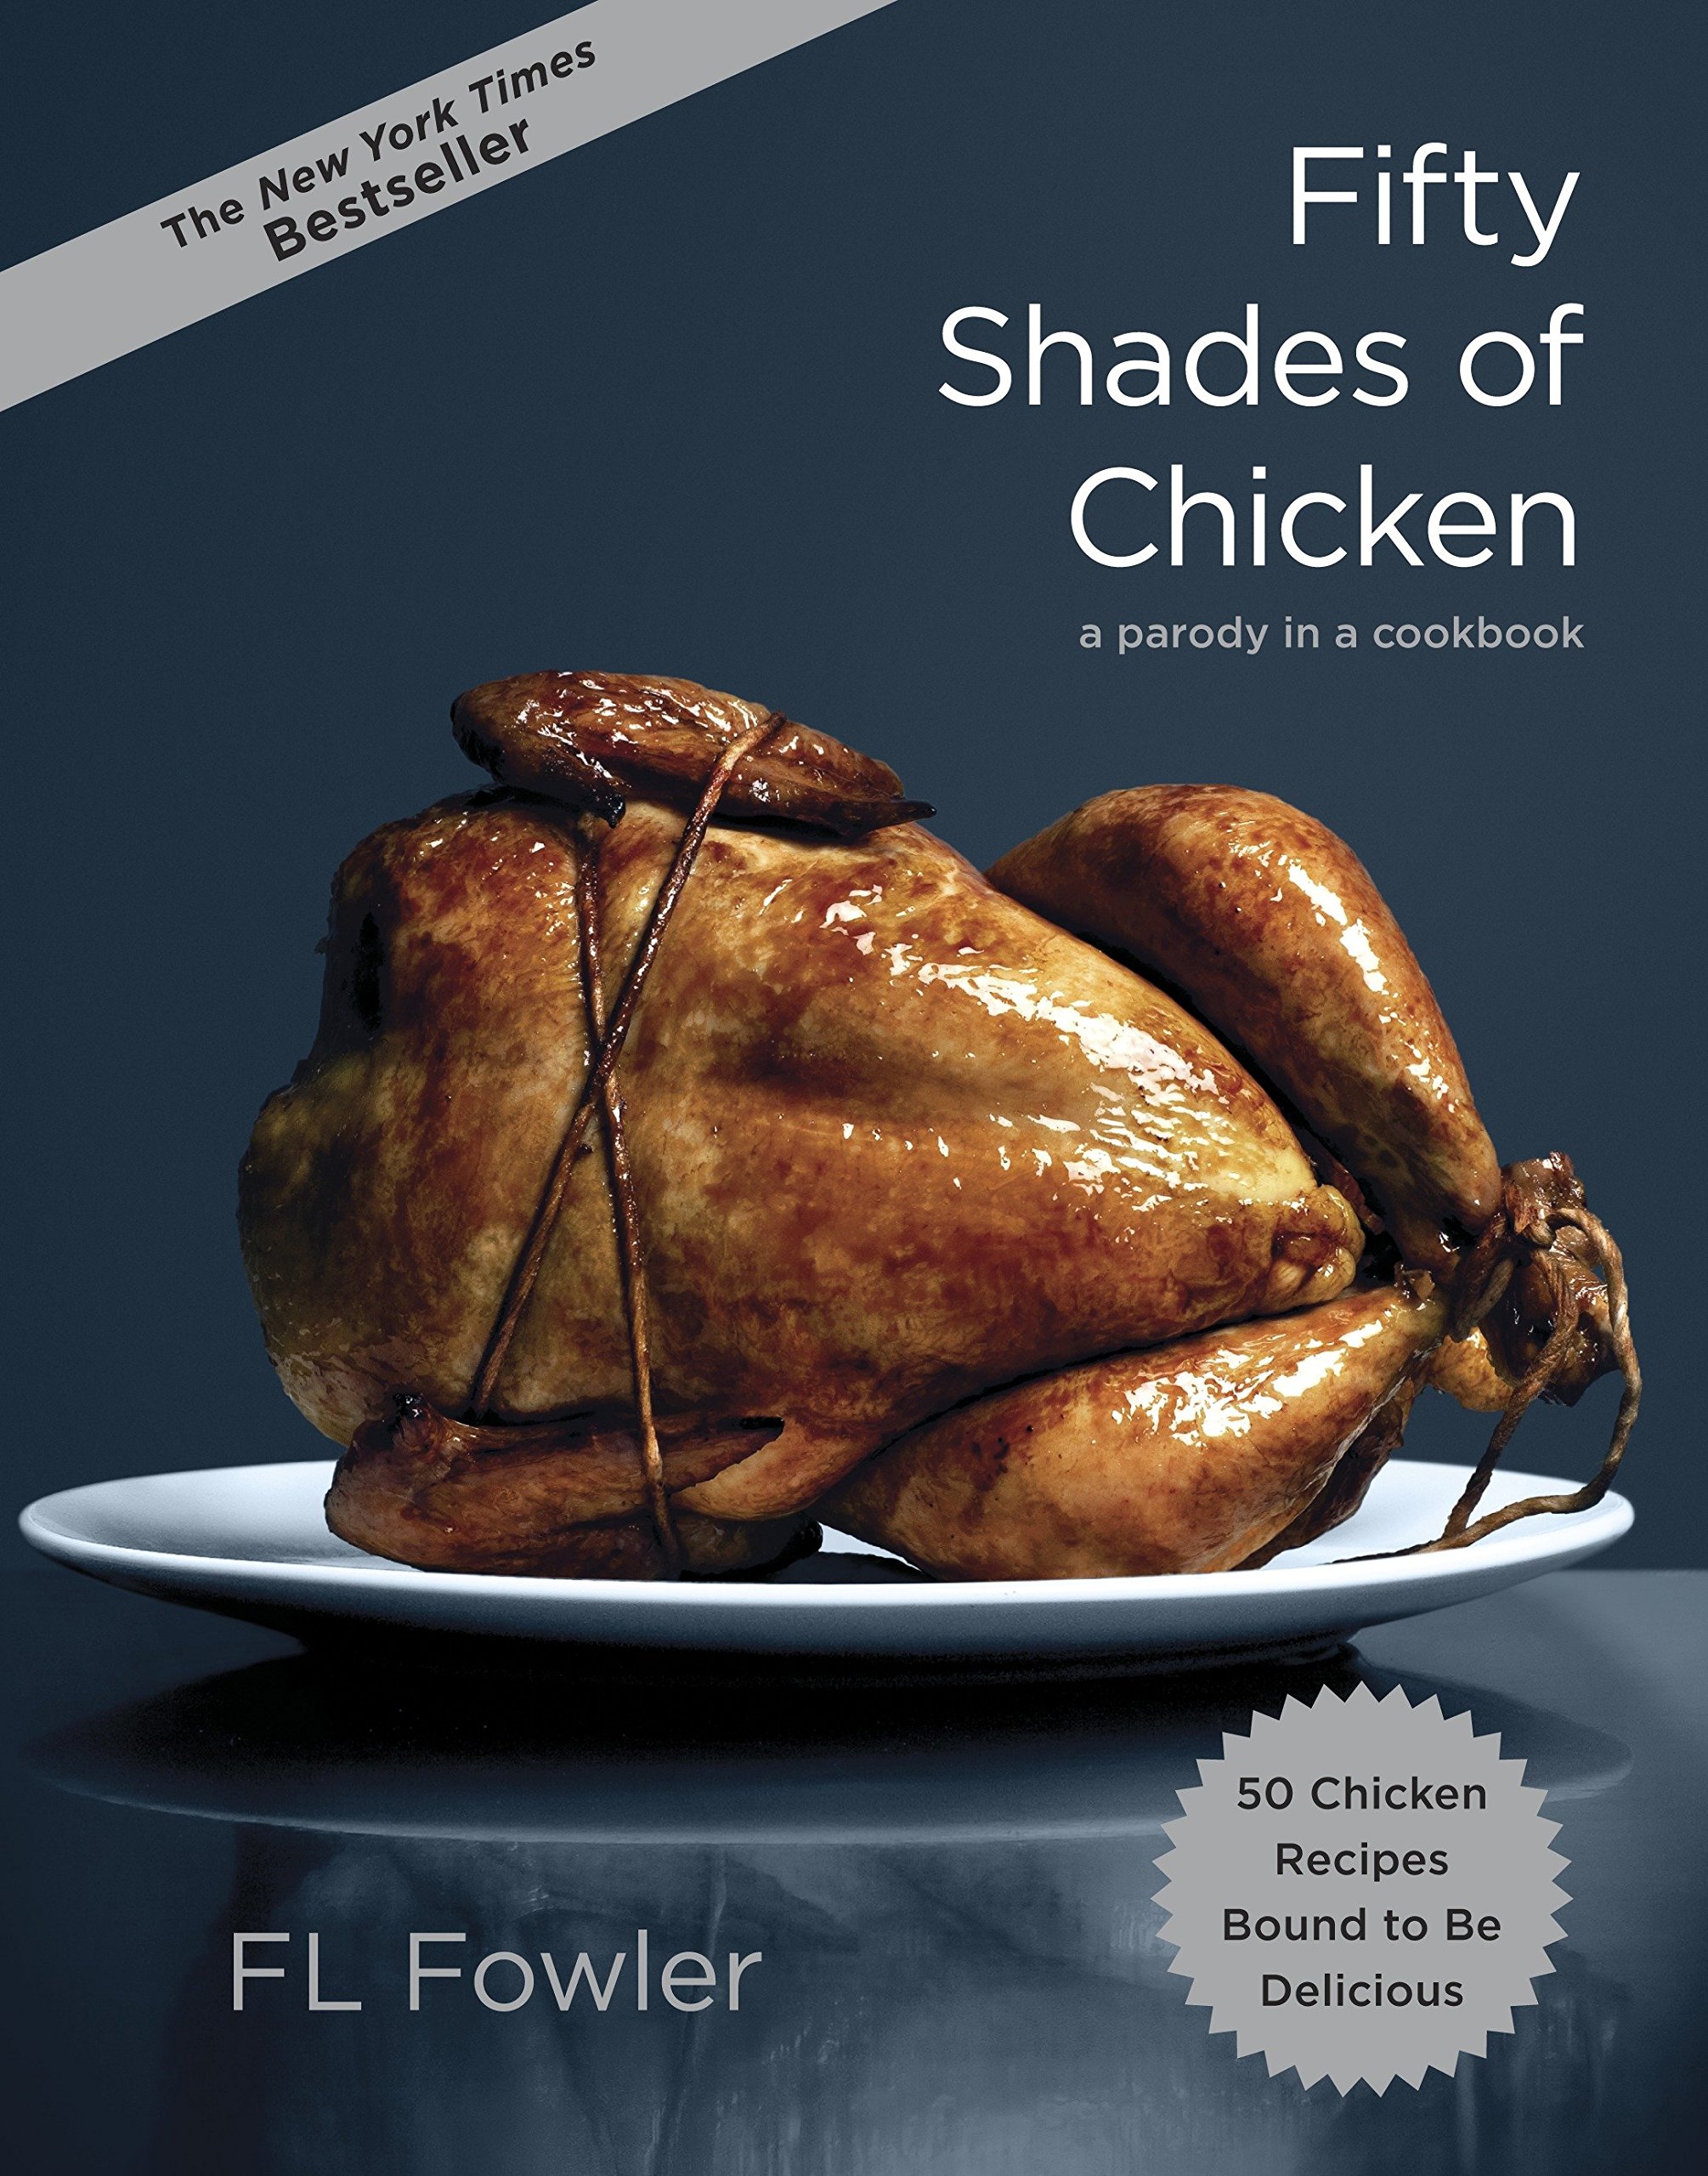 50 shades of chicken - The New York Times Bestseller Fifty Shades of Chicken a parody in a cookbook 50 Chicken Recipes Bound to Be Delicious Fl Fowler